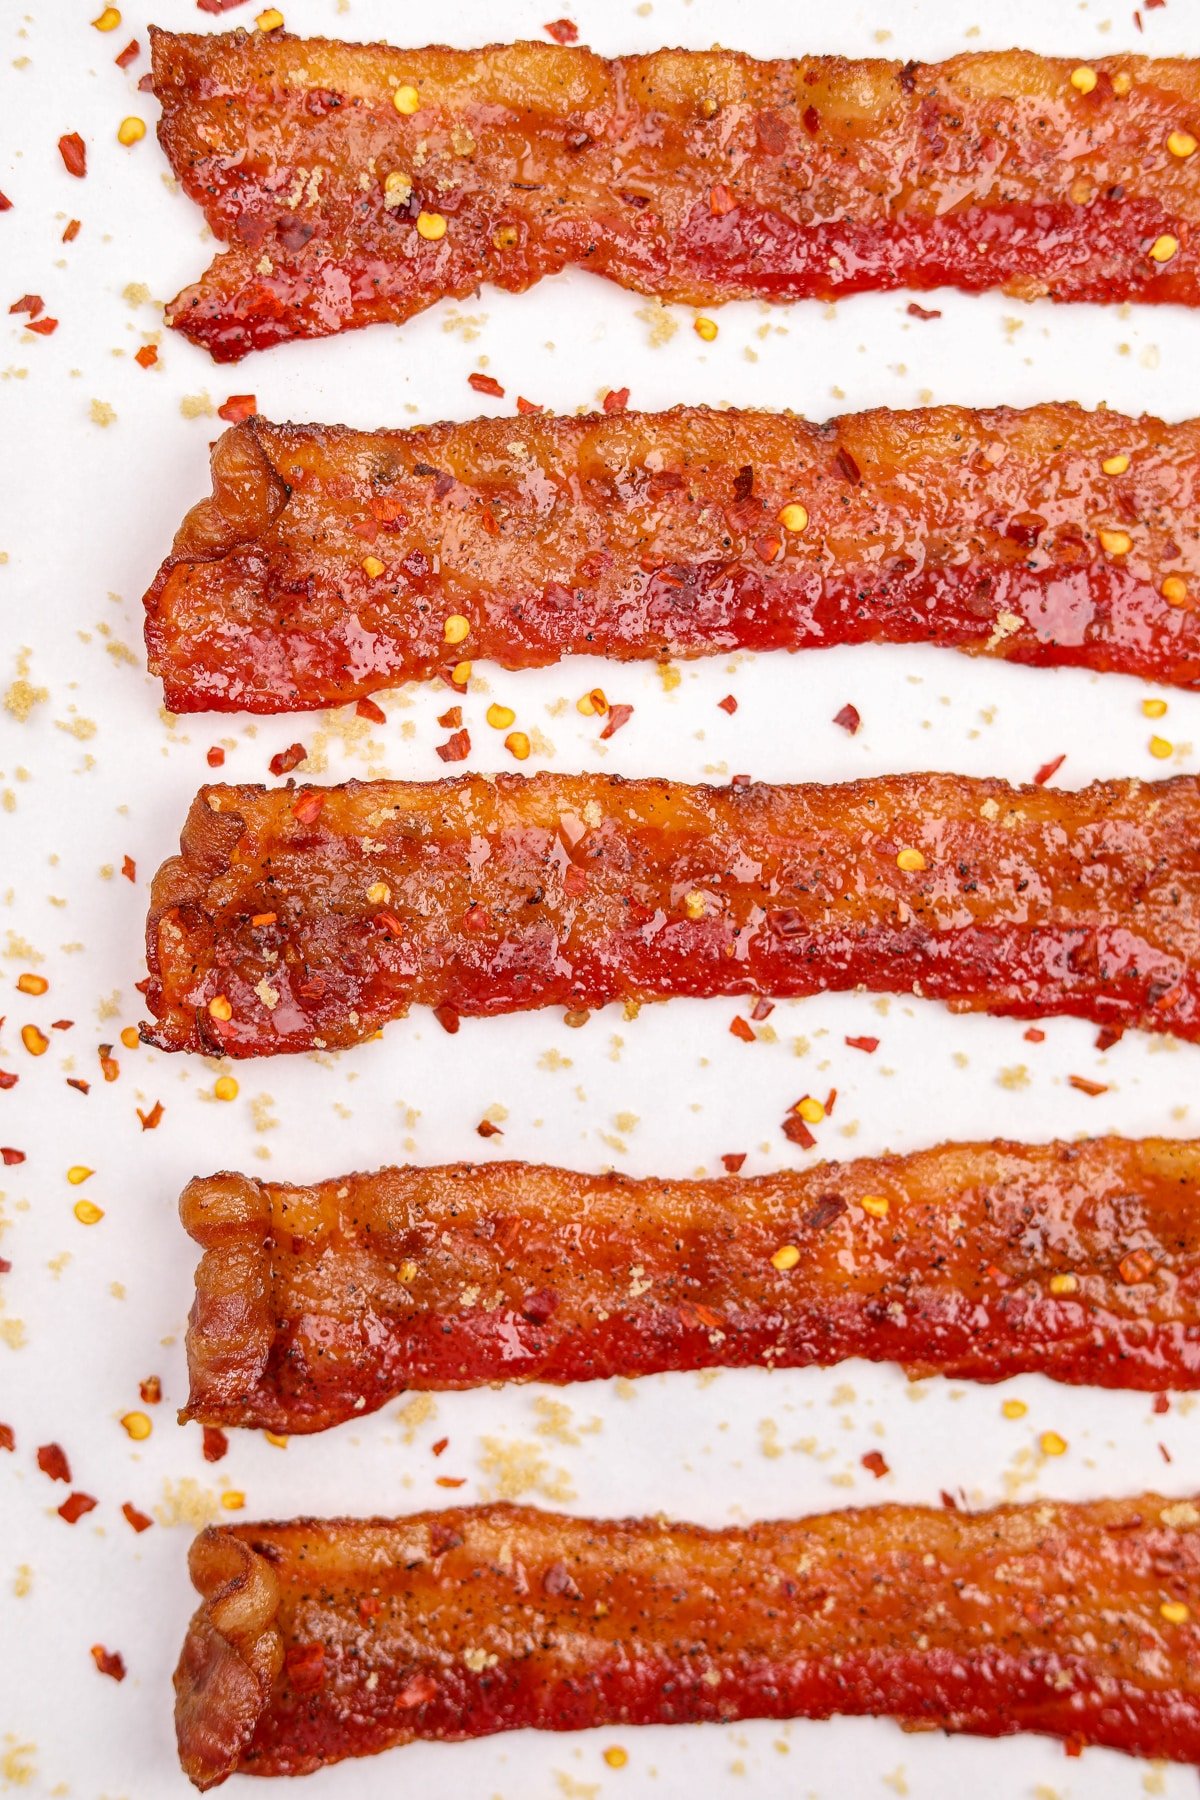 Slices of cooked and candied bacon on a white background.